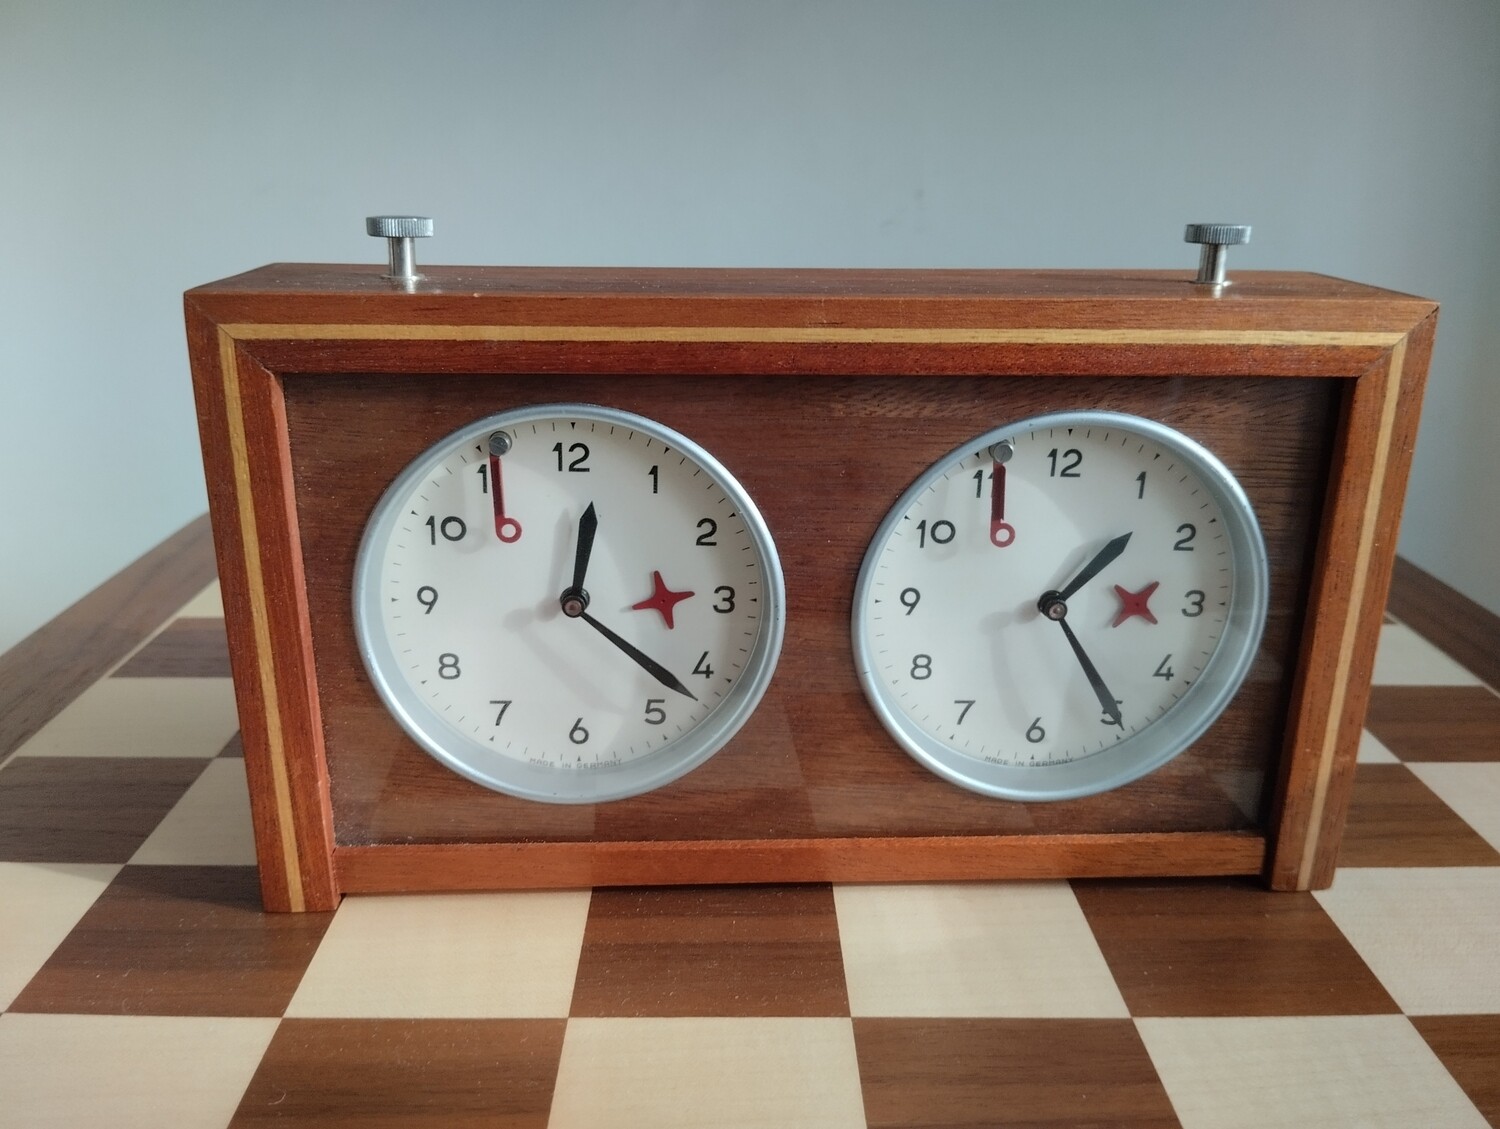 Garde clock with stripes